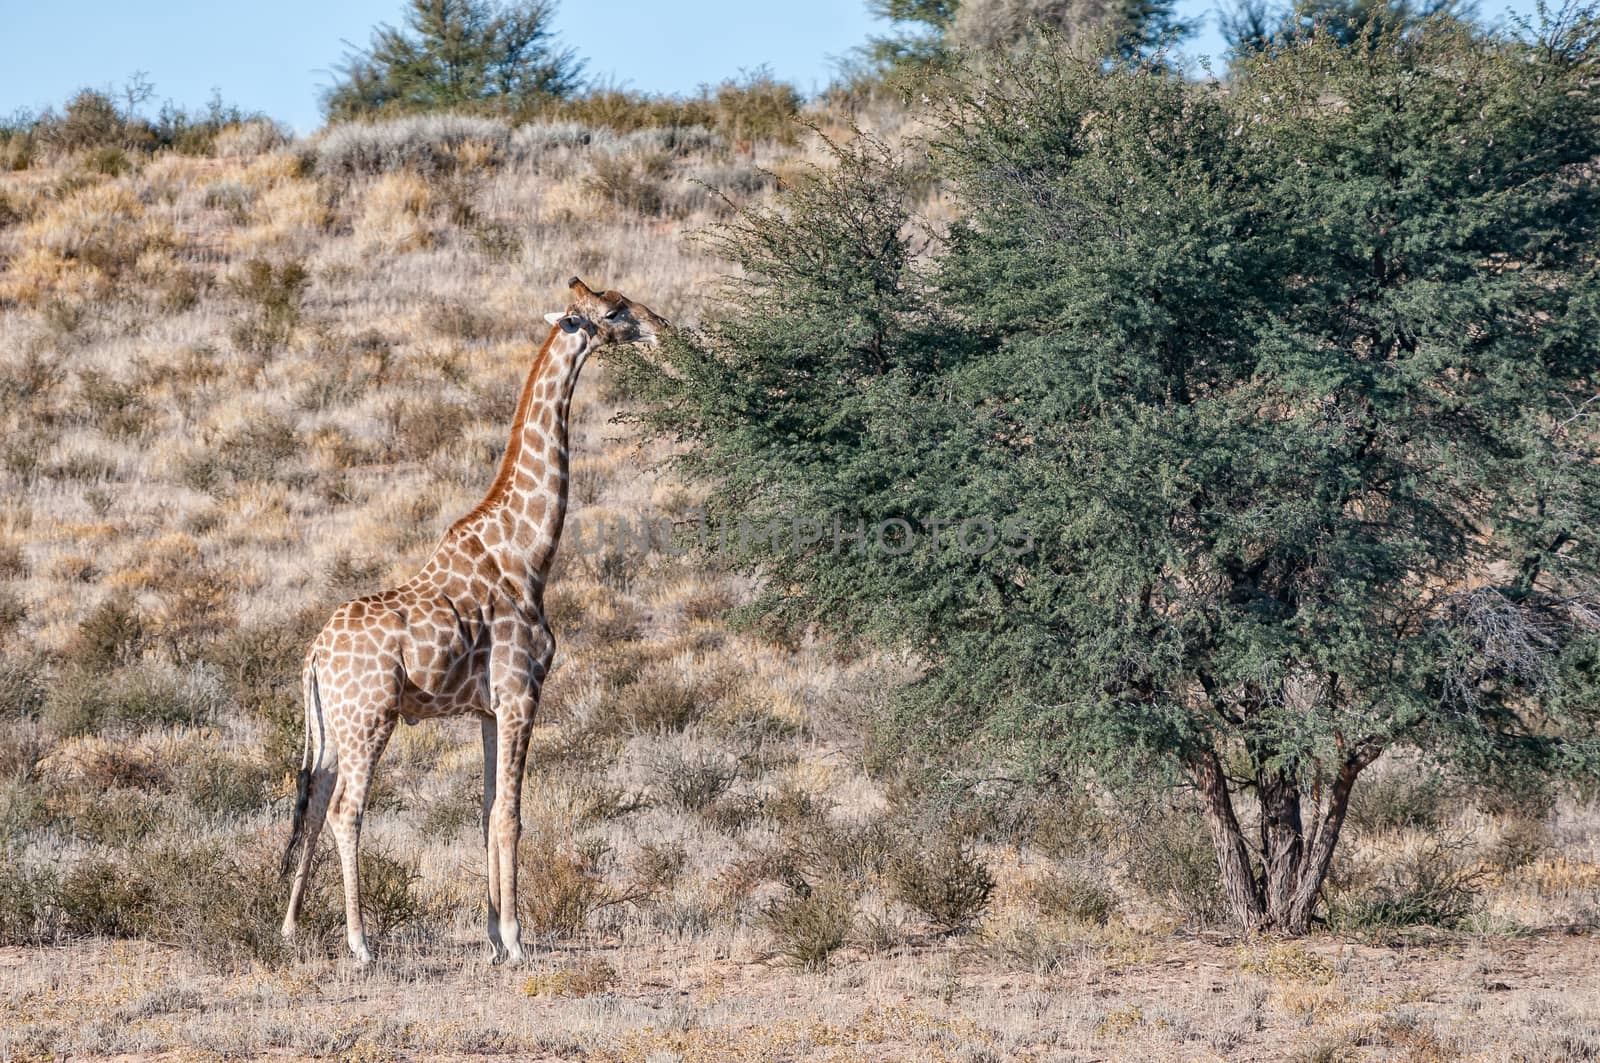 South African giraffe browsing on a tree in the Kgalagadi by dpreezg